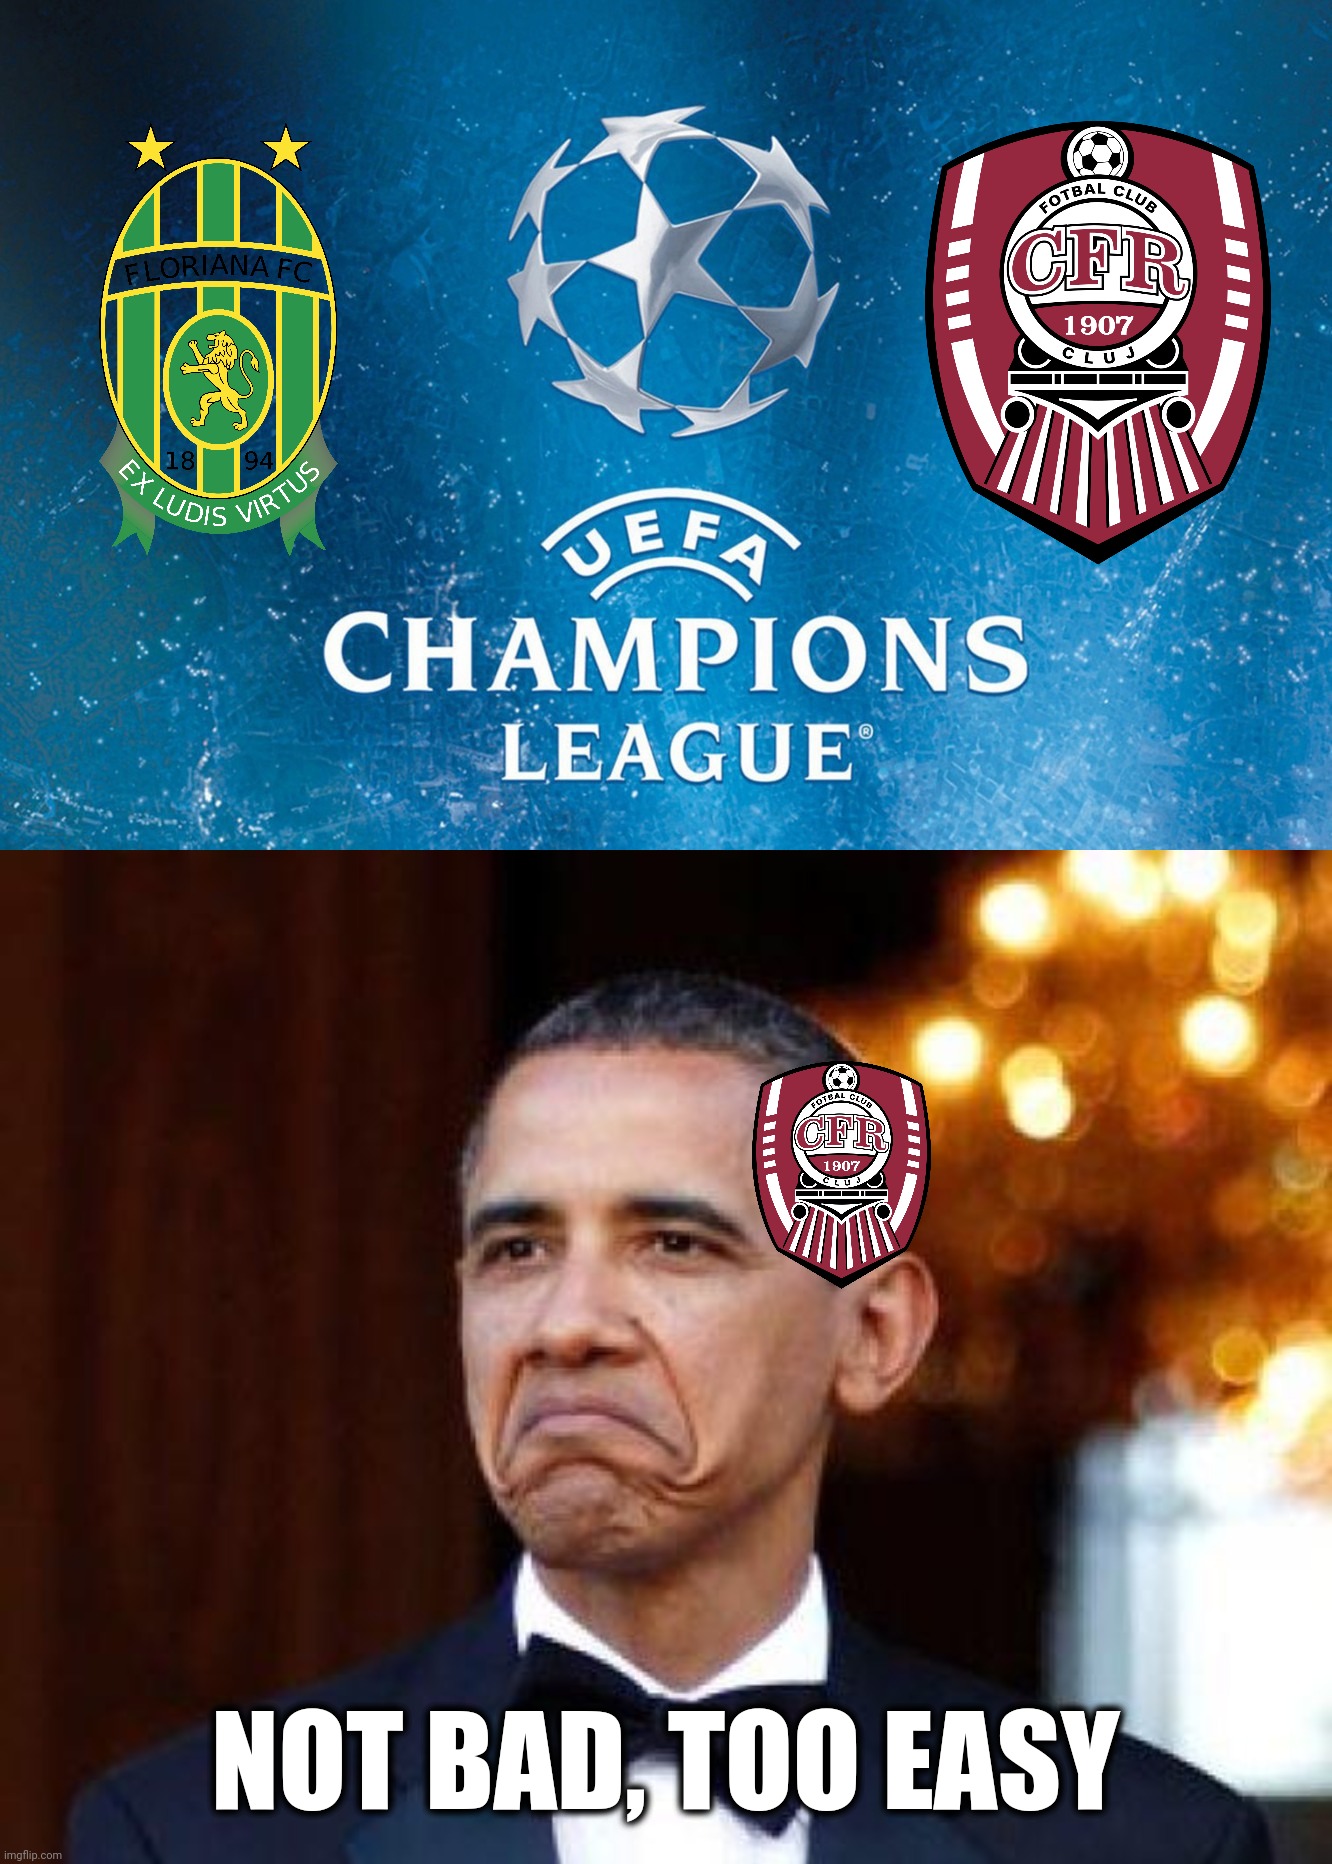 Floriana vs CLUJ |  NOT BAD, TOO EASY | image tagged in memes,cfr cluj,funny,football,soccer,champions league | made w/ Imgflip meme maker